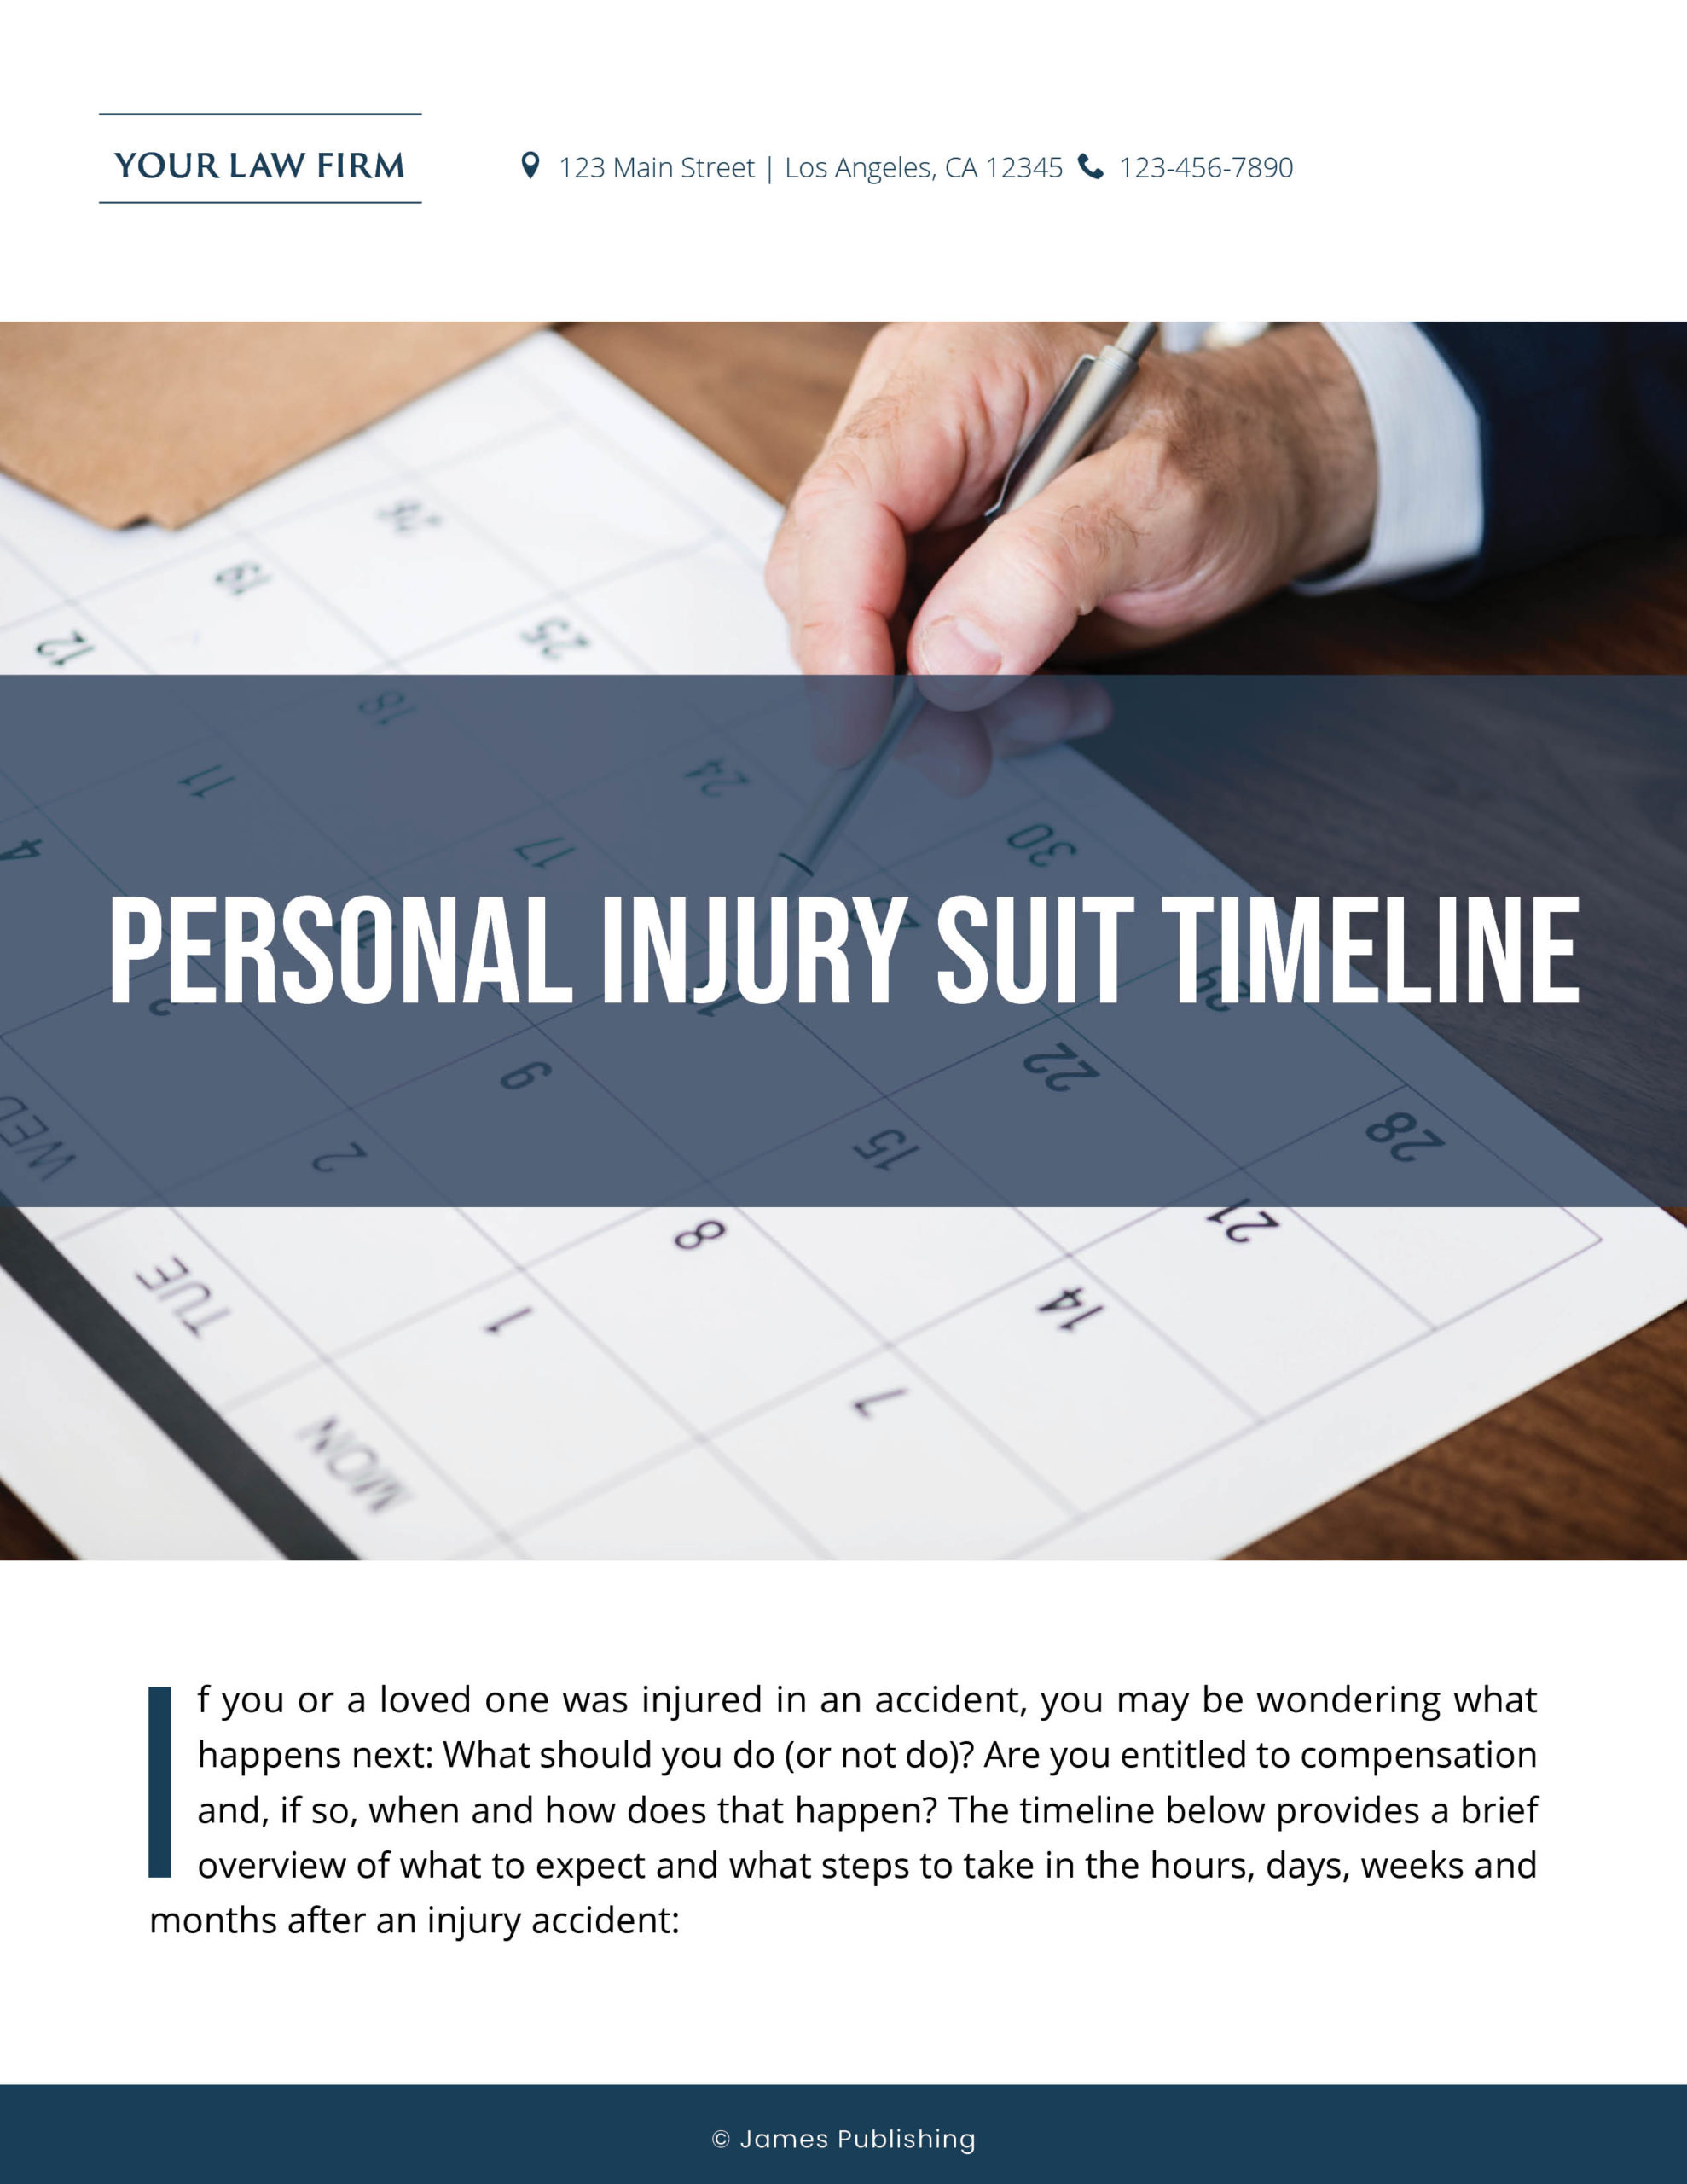 PI-23 Personal Injury Suit Timeline